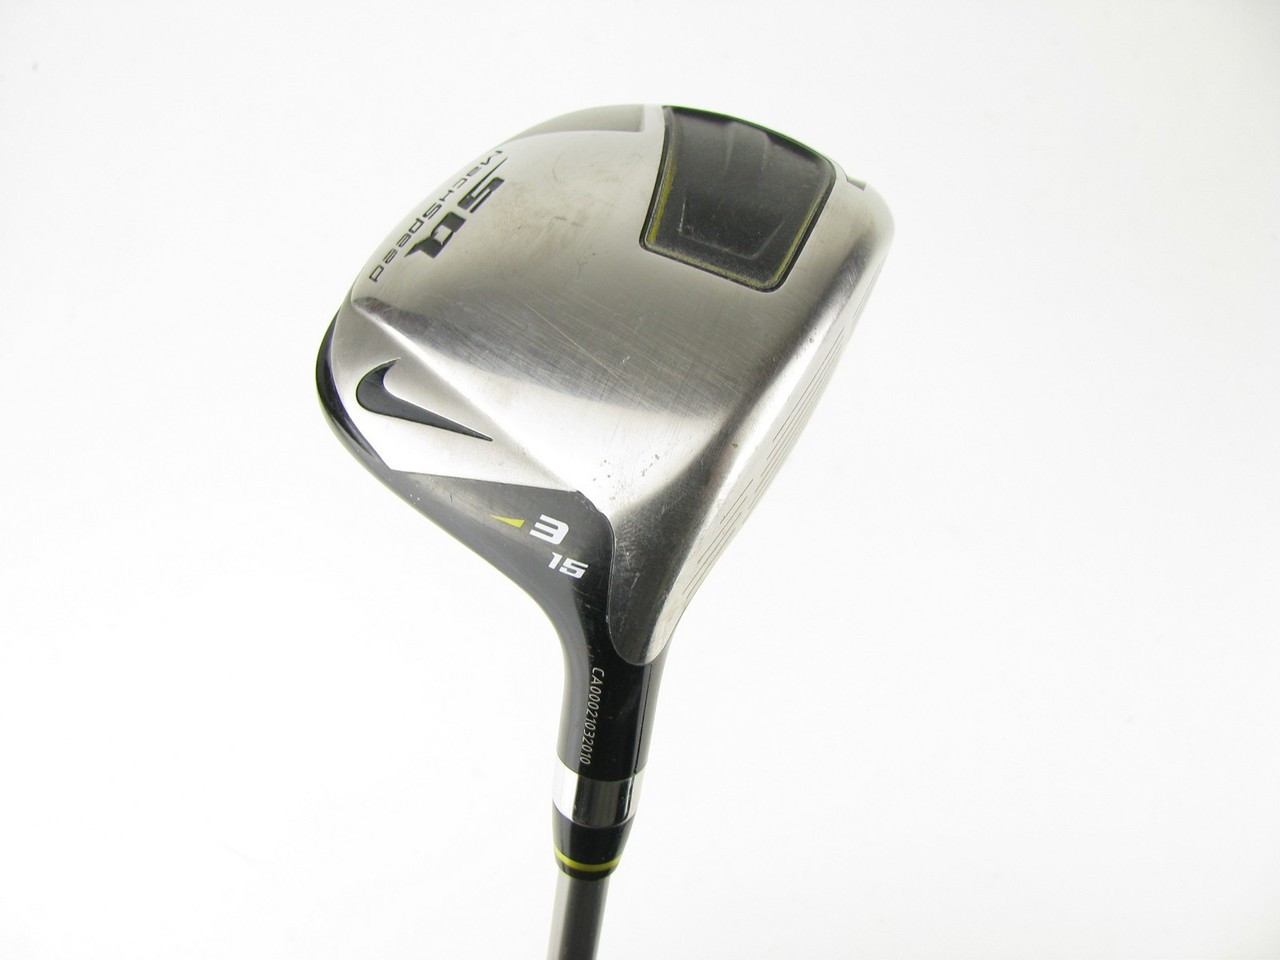 Nike SQ Machspeed 3 wood 15 degree w/ Axivcore 70g Regular (Out of Stock) -  Clubs n Covers Golf